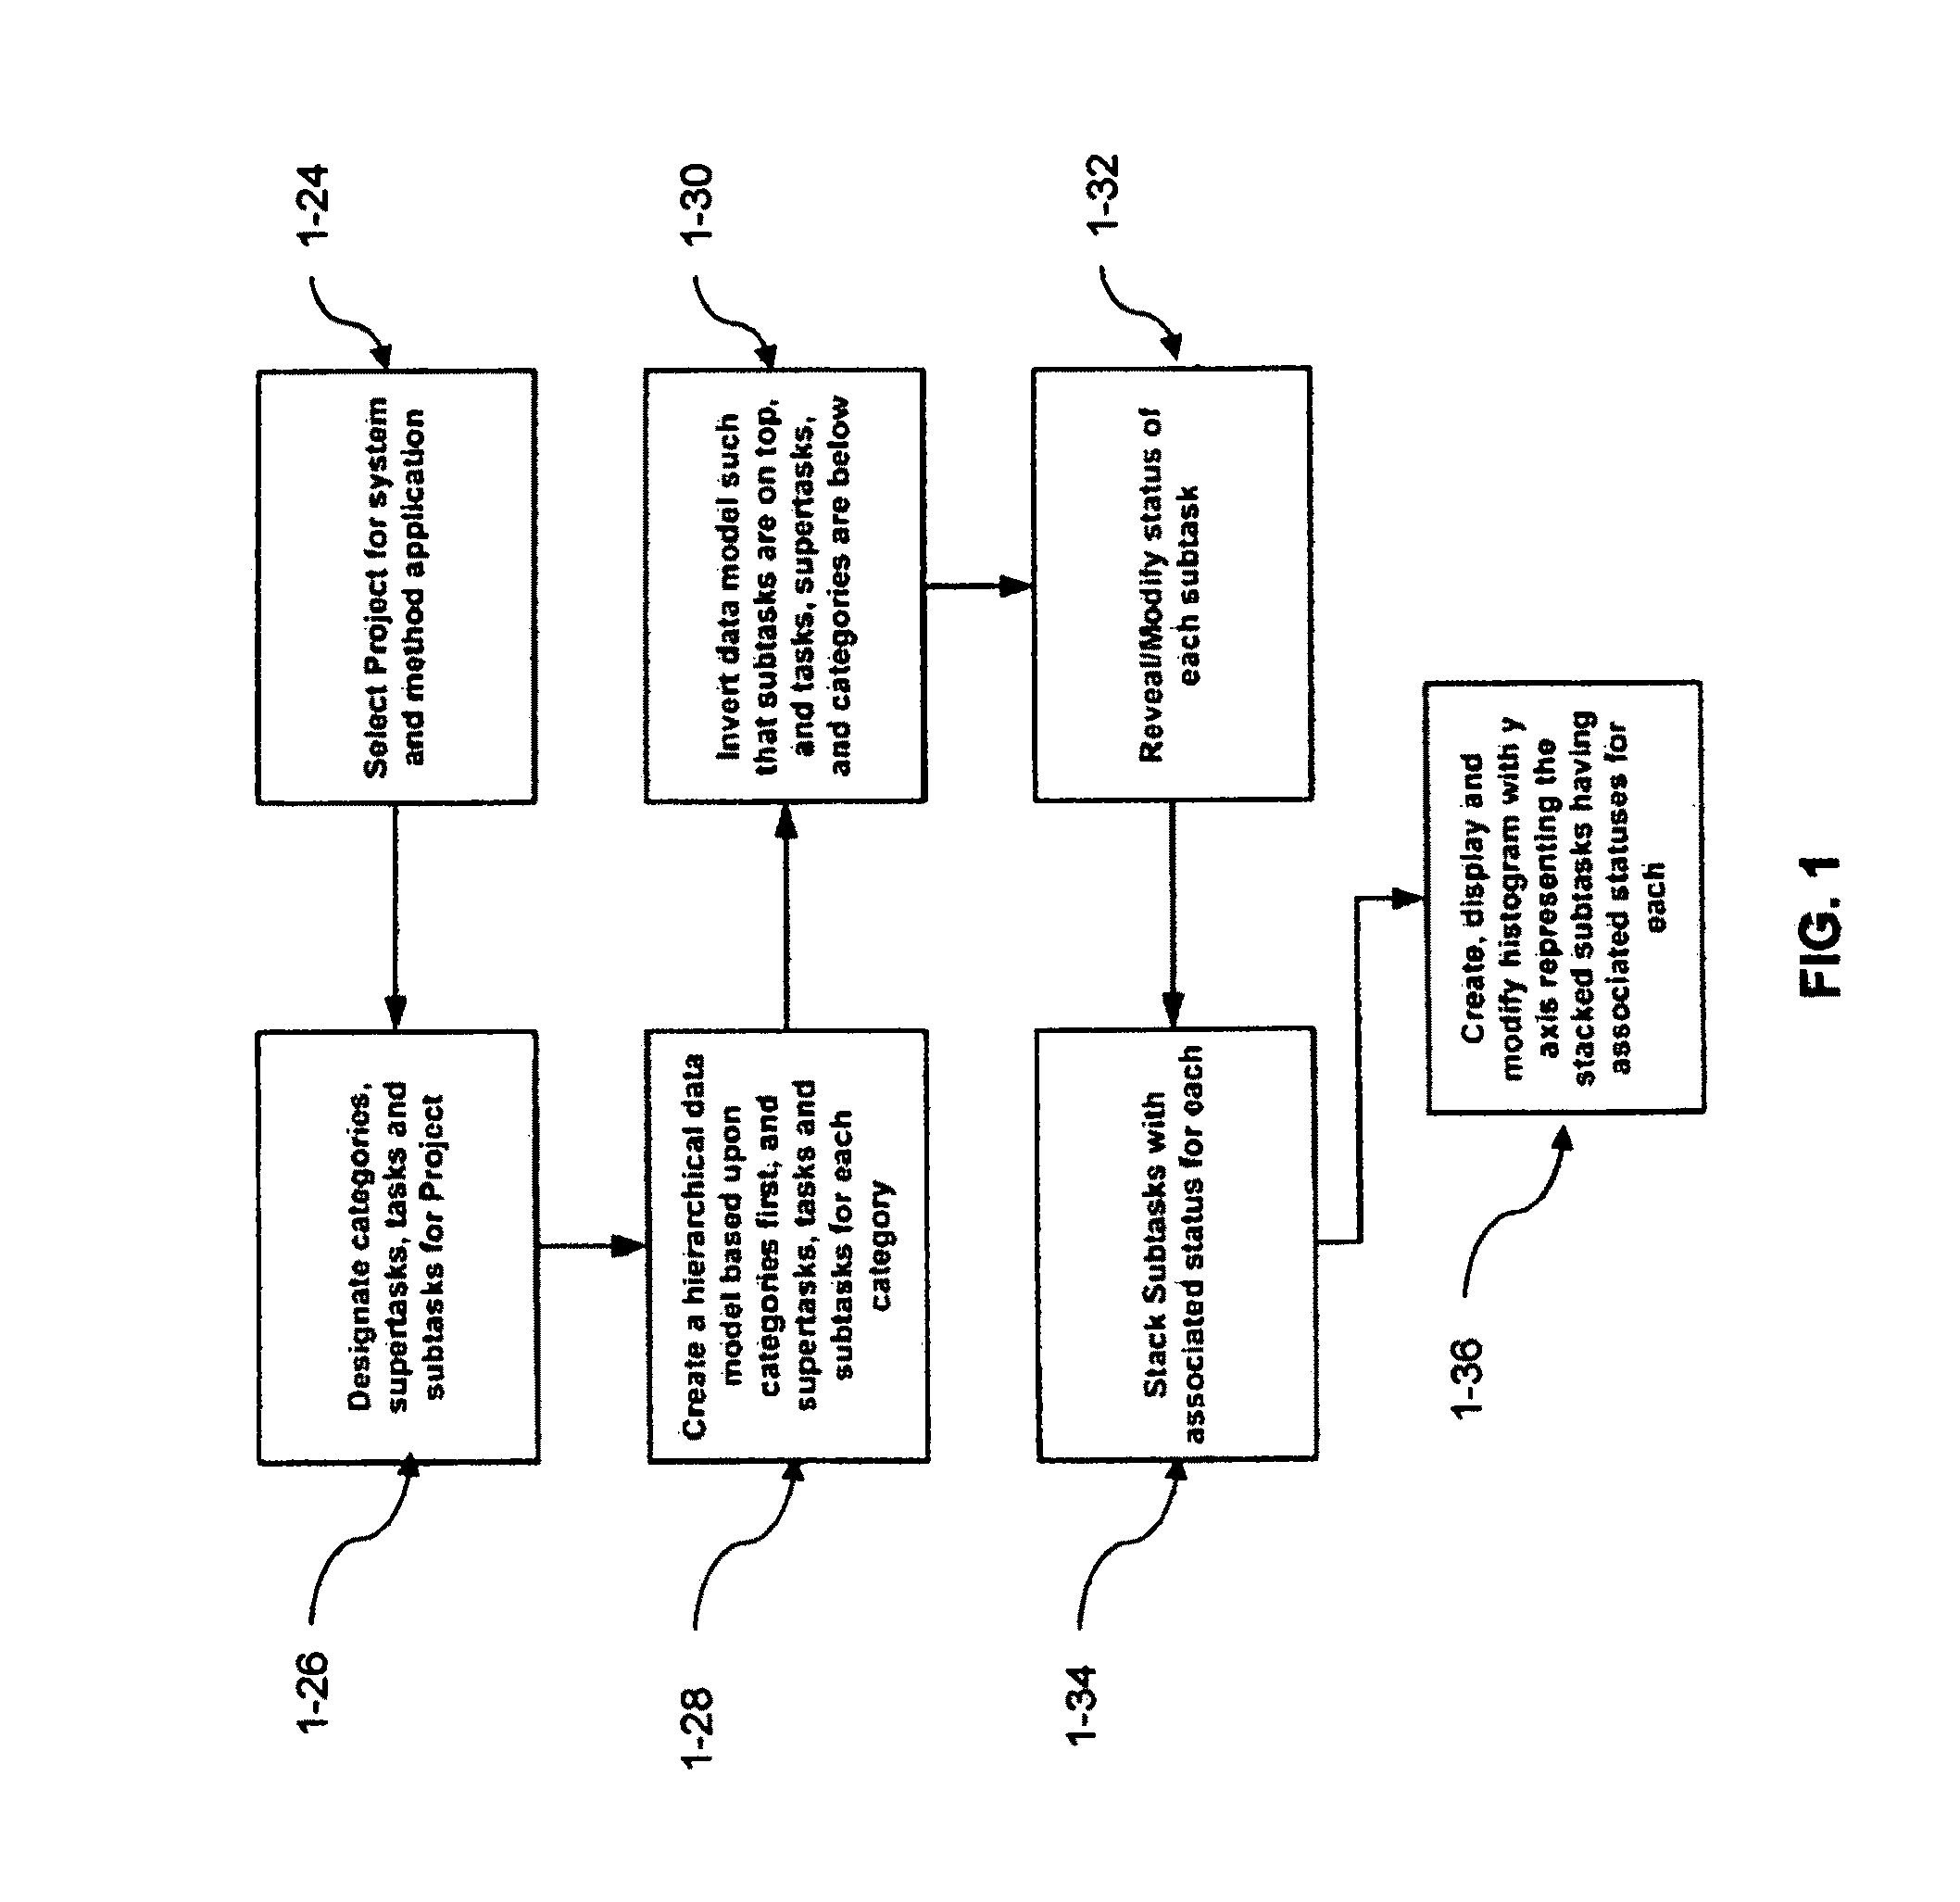 System and method for promoting action on visualized changes to information